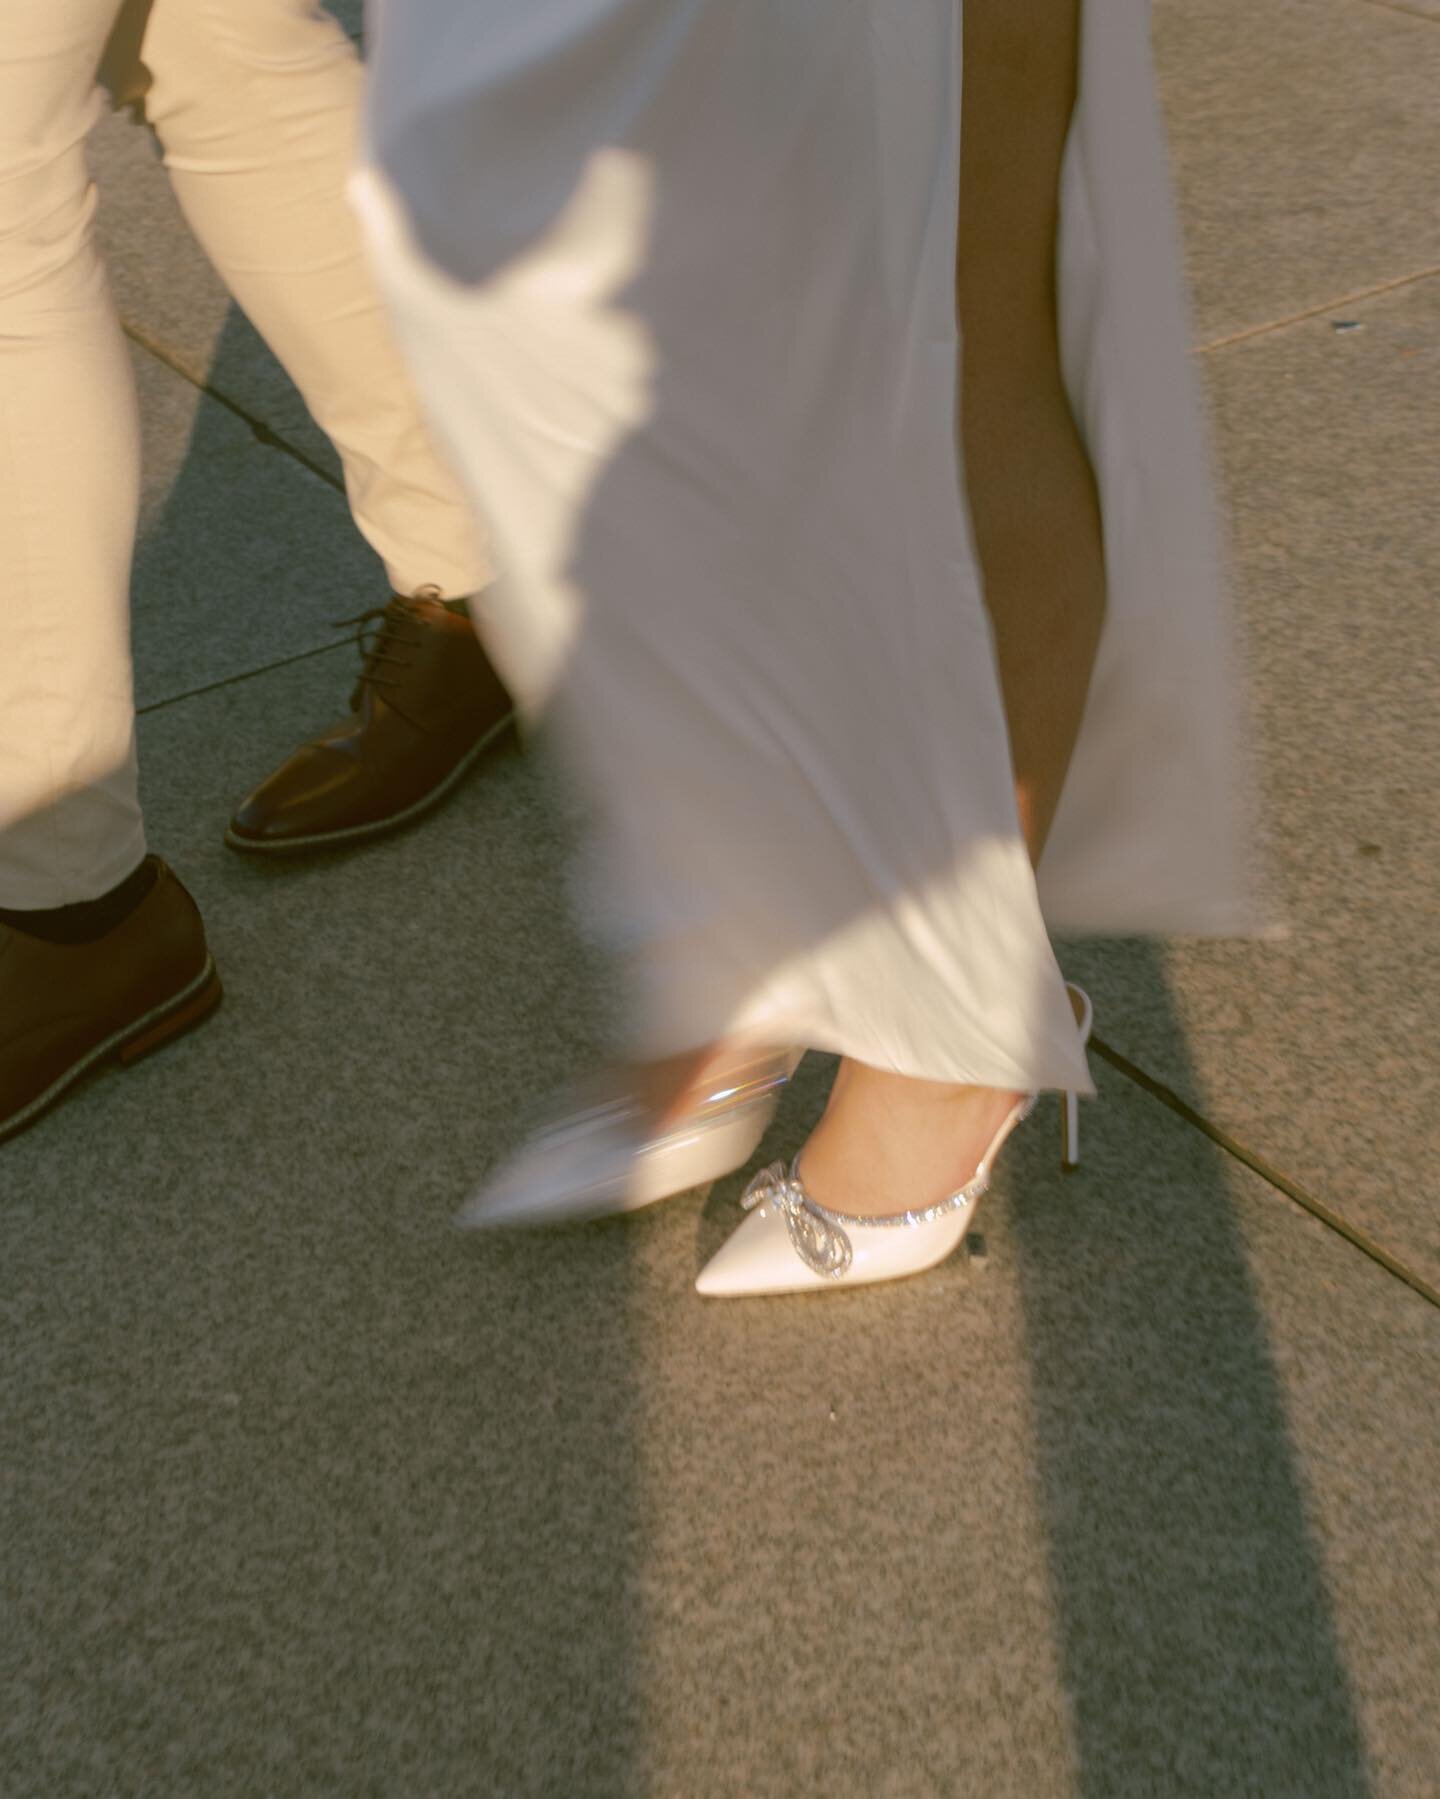 Yesterday&rsquo;s downtown Nashville engagement session &gt;&gt;&gt; took many pics of their feet!!! ✨